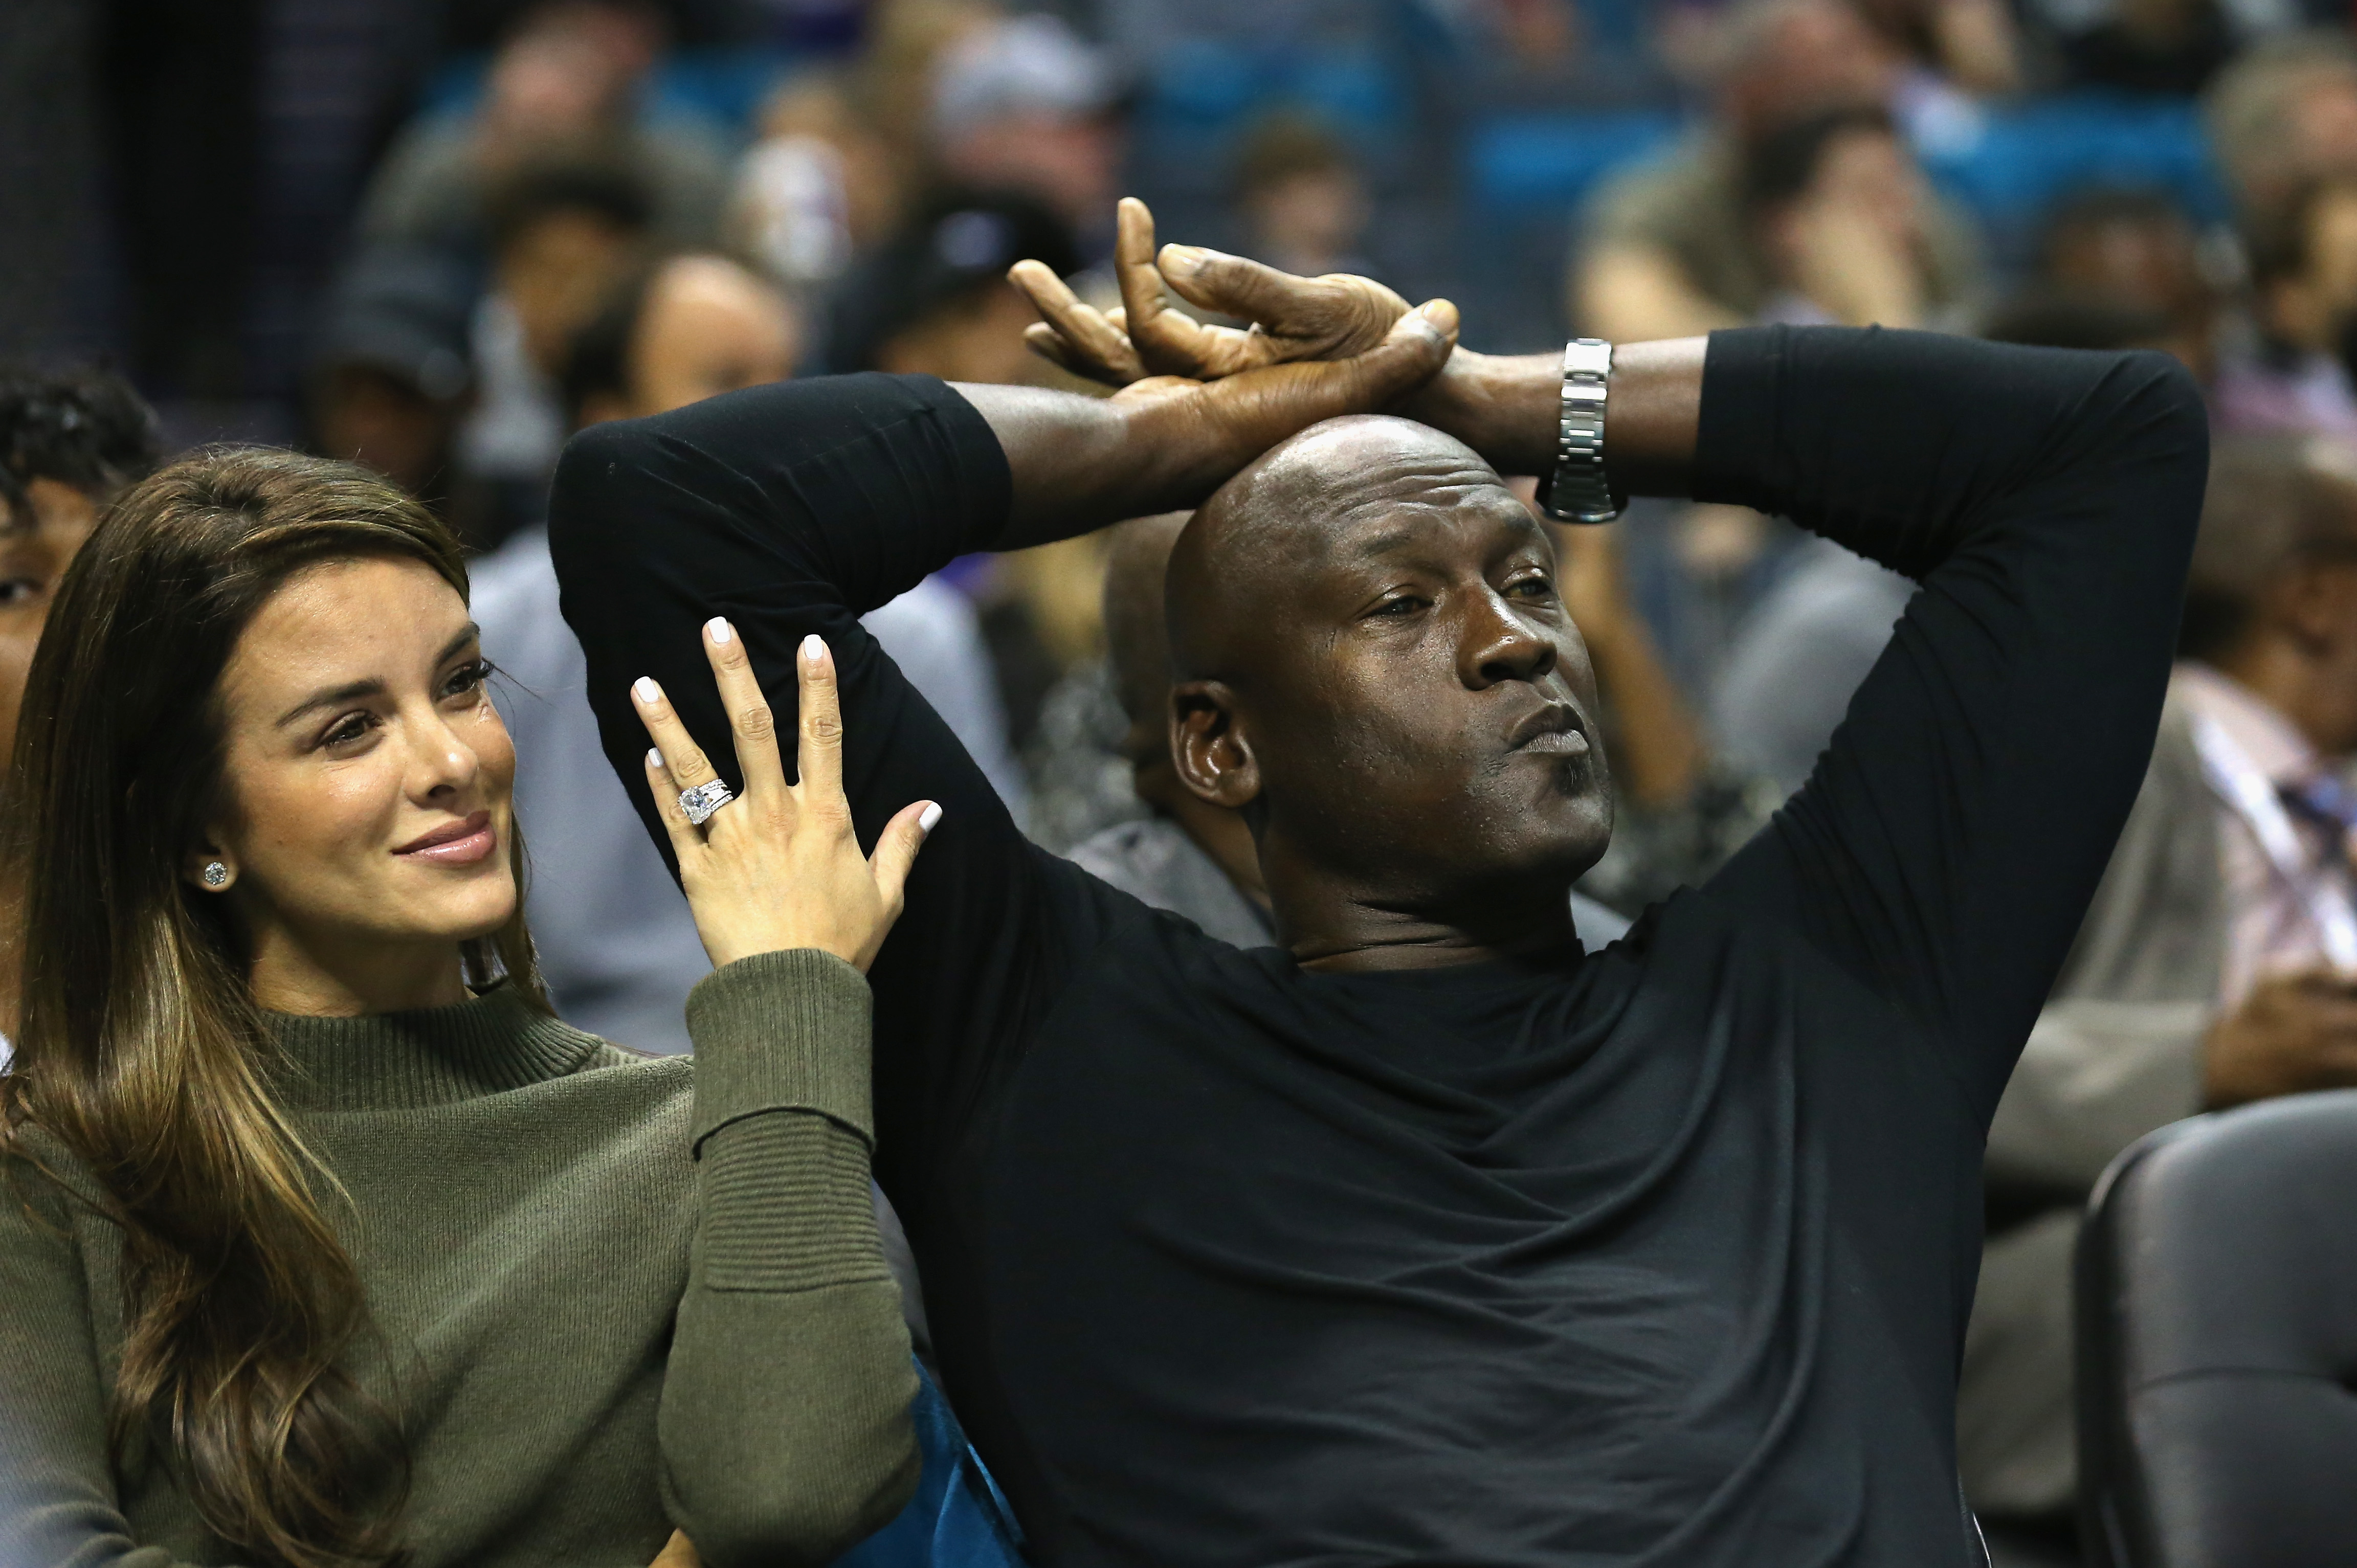 Michael Jordan and Yvette Prieto at Time Warner Cable Arena on November 1, 2015 in Charlotte, North Carolina | Source: Getty Images